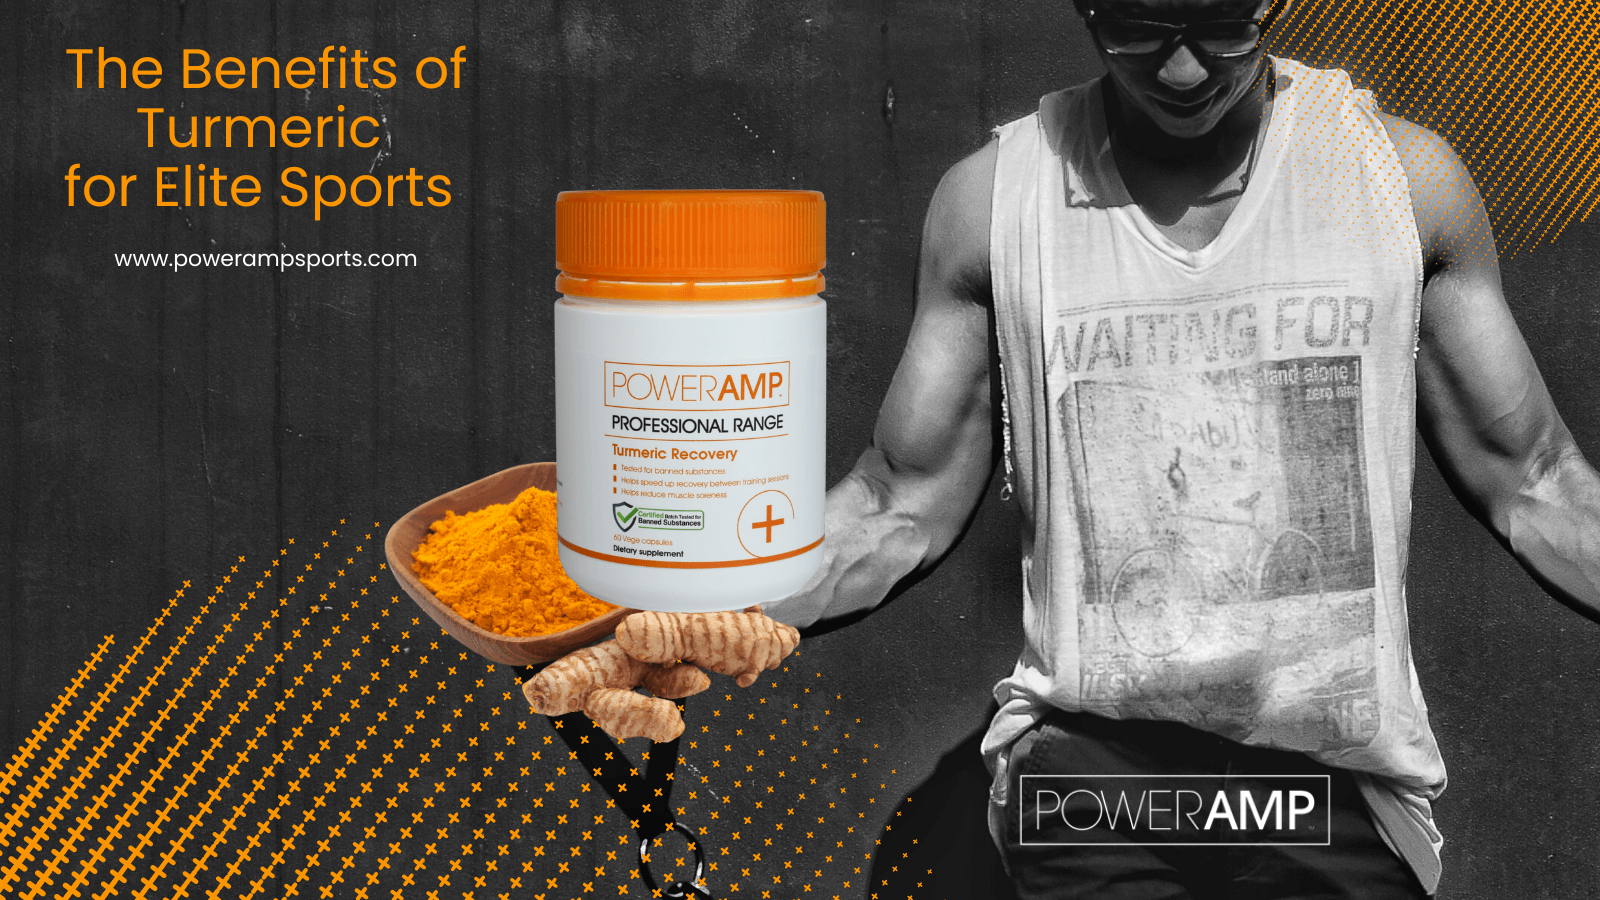 The Benefits of Turmeric for Elite Sports